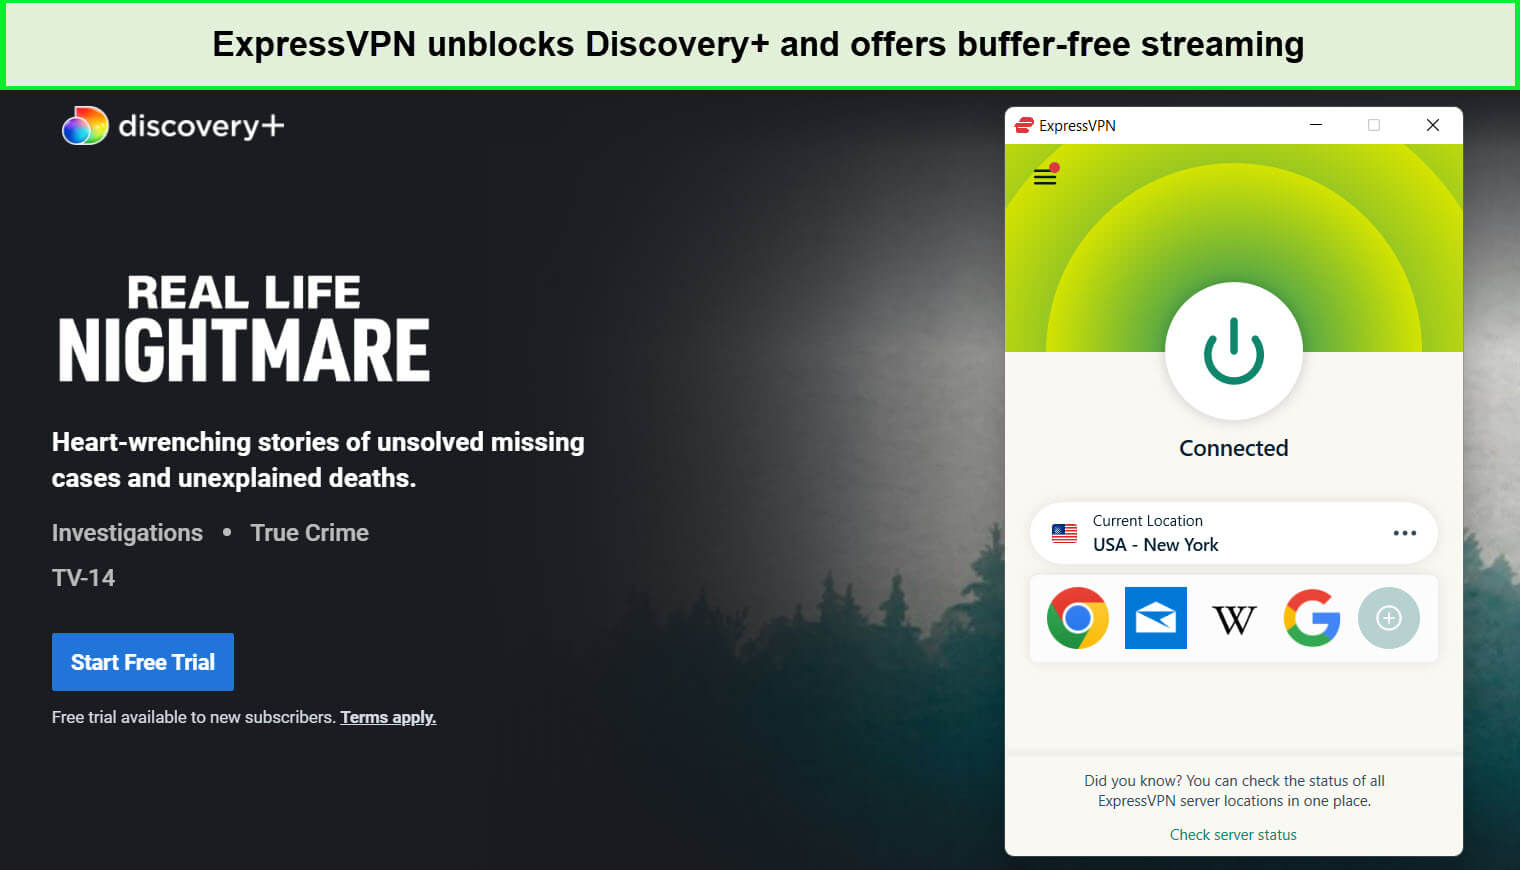 geo-restricted-content-of-discovery-plus-unblocked-via-ExpressVPN-in-Hong Kong